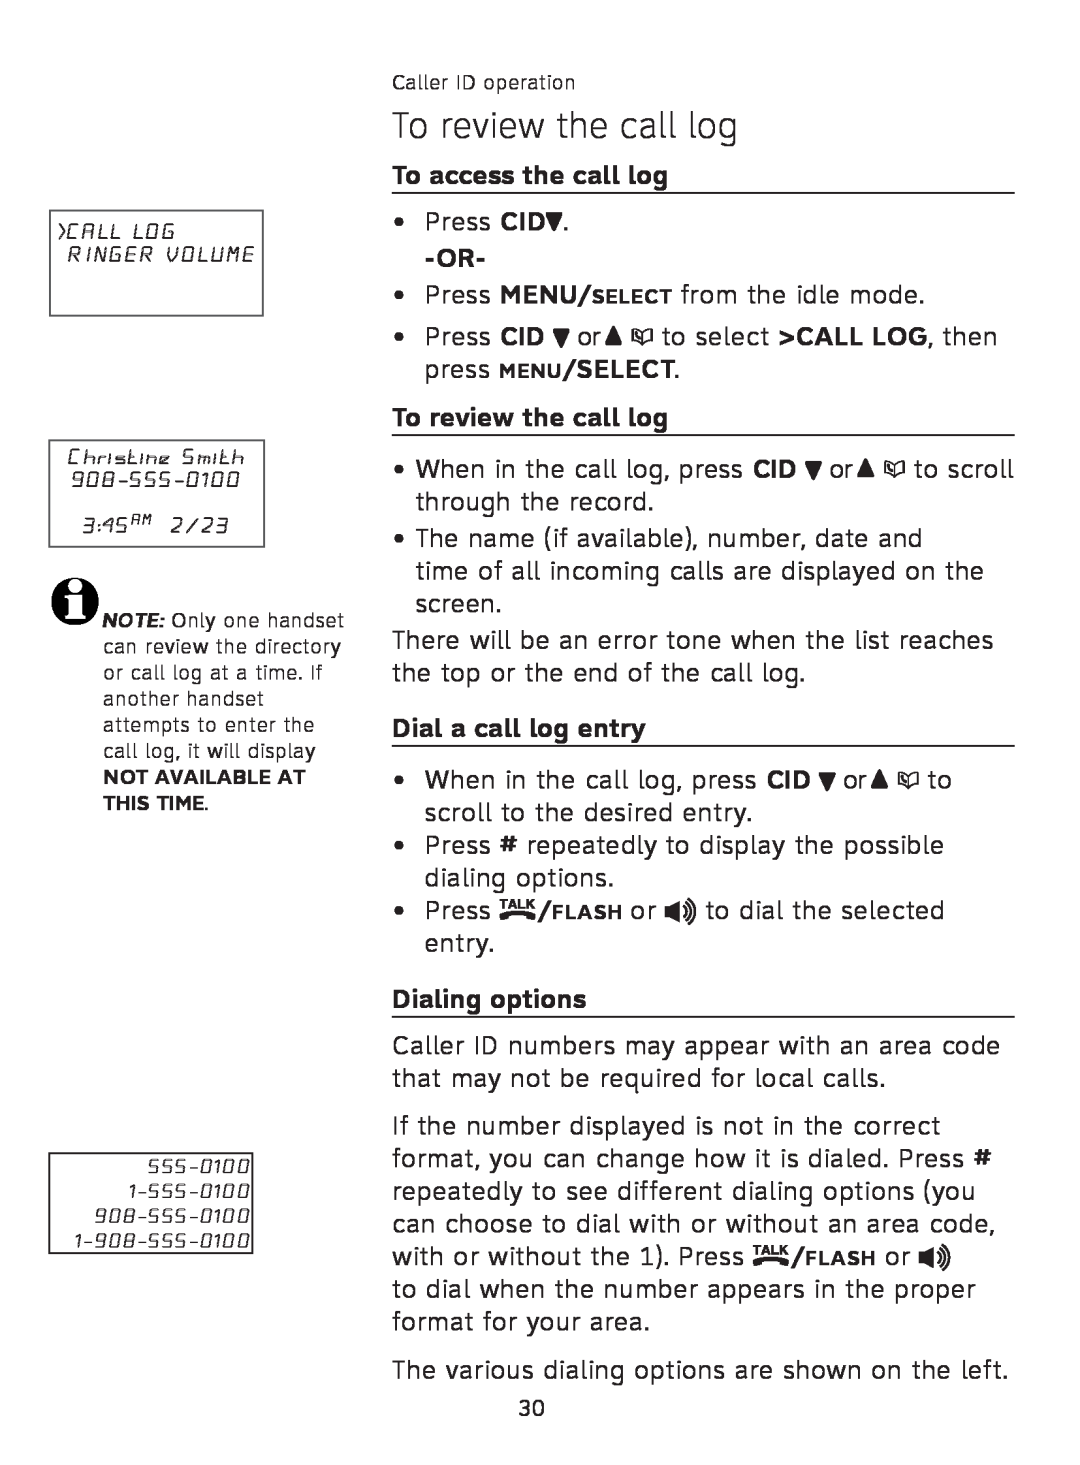 AT&T AT3111-2 user manual To review the call log, To access the call log, Dial a call log entry, Dialing options 